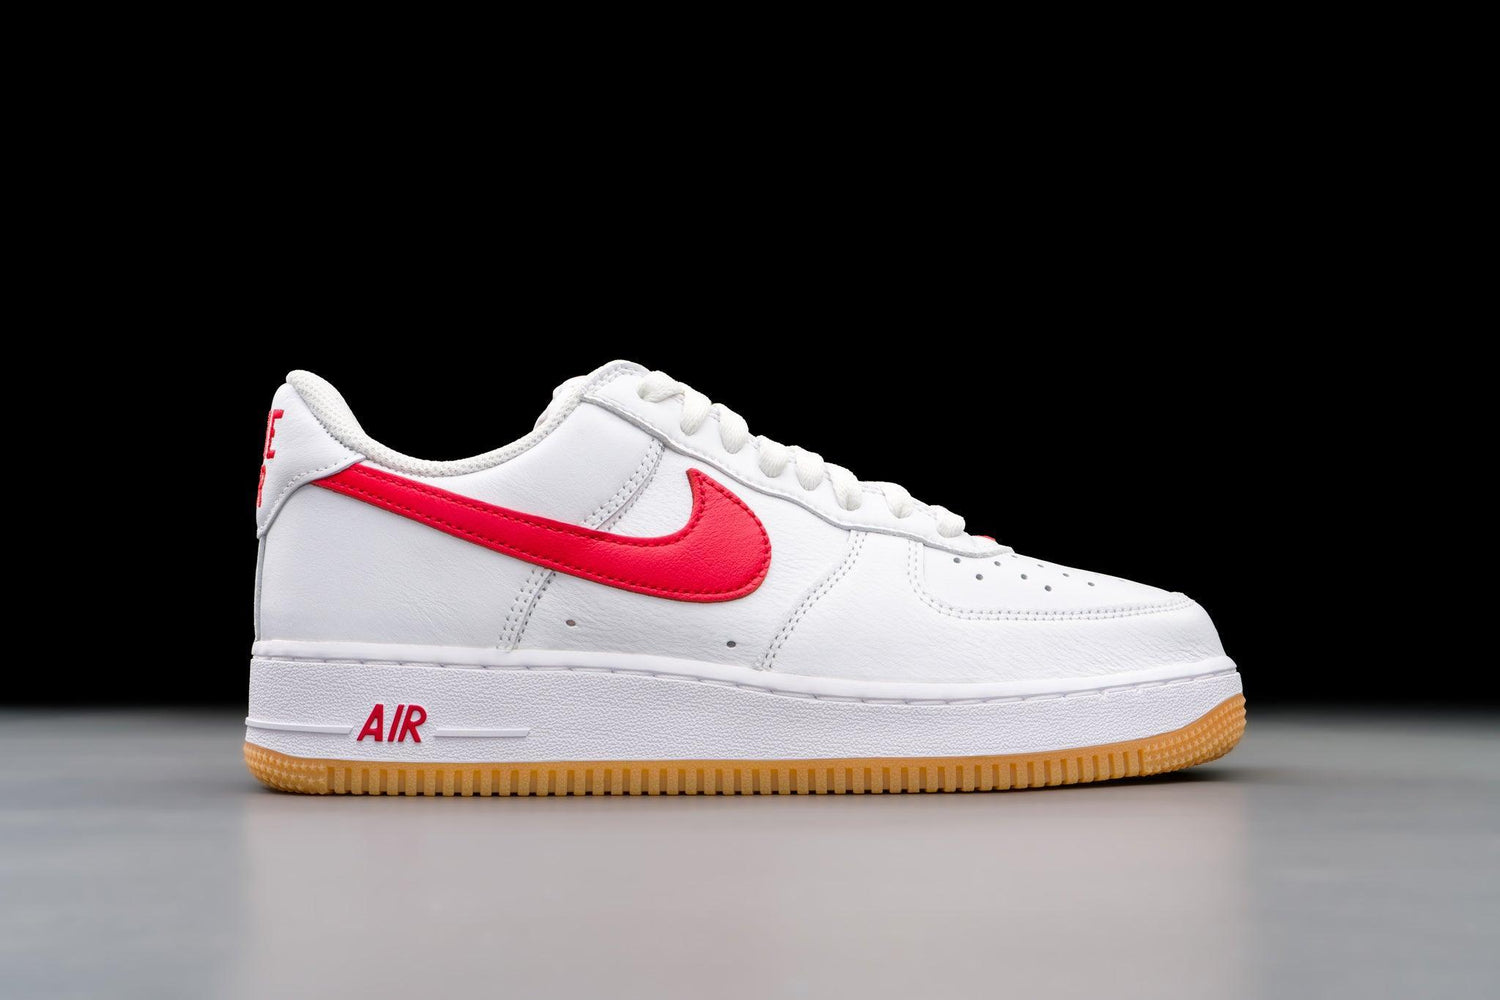 nike air force 1 07 low color of the month university red gum lo10m 1 1500x